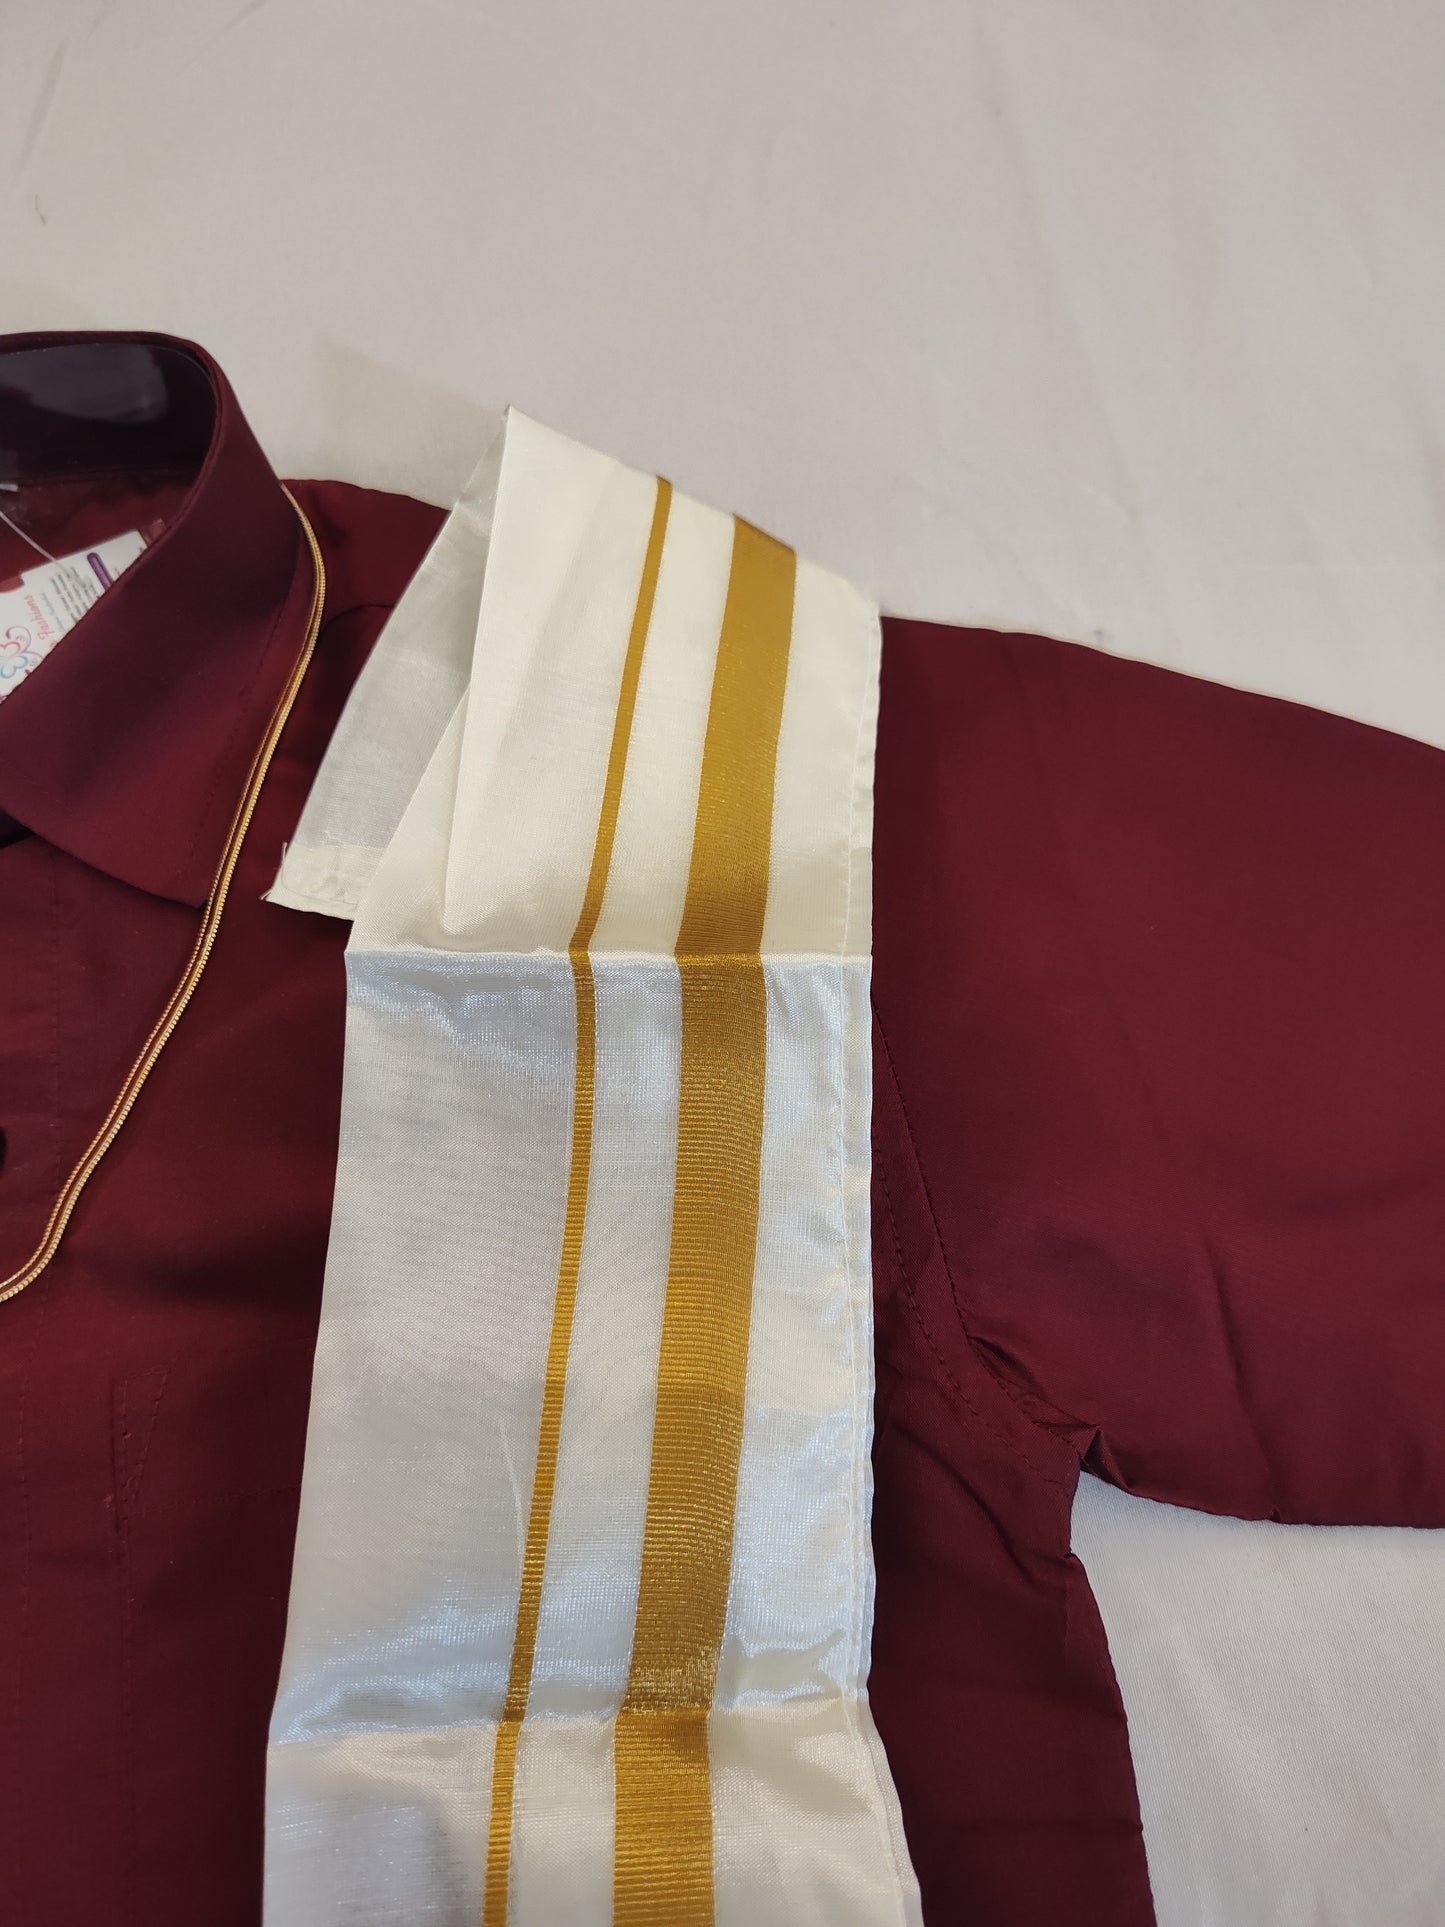 Alluring Maroon Color Shirt With Dhoti In USA